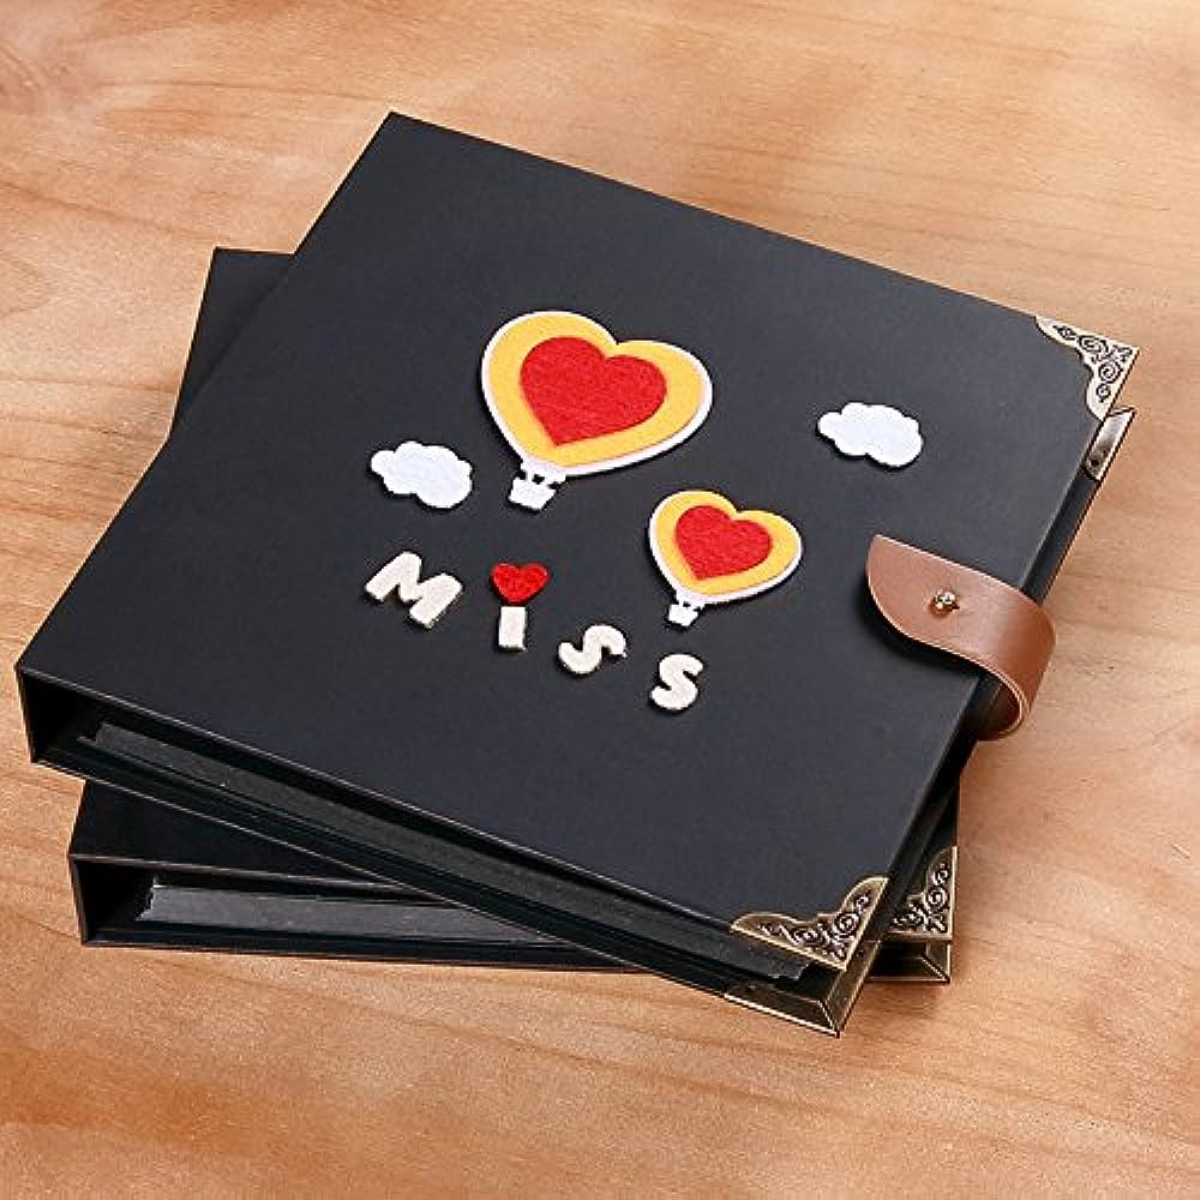 22. Capture 20 Years of Love with a Handcrafted Photo Album